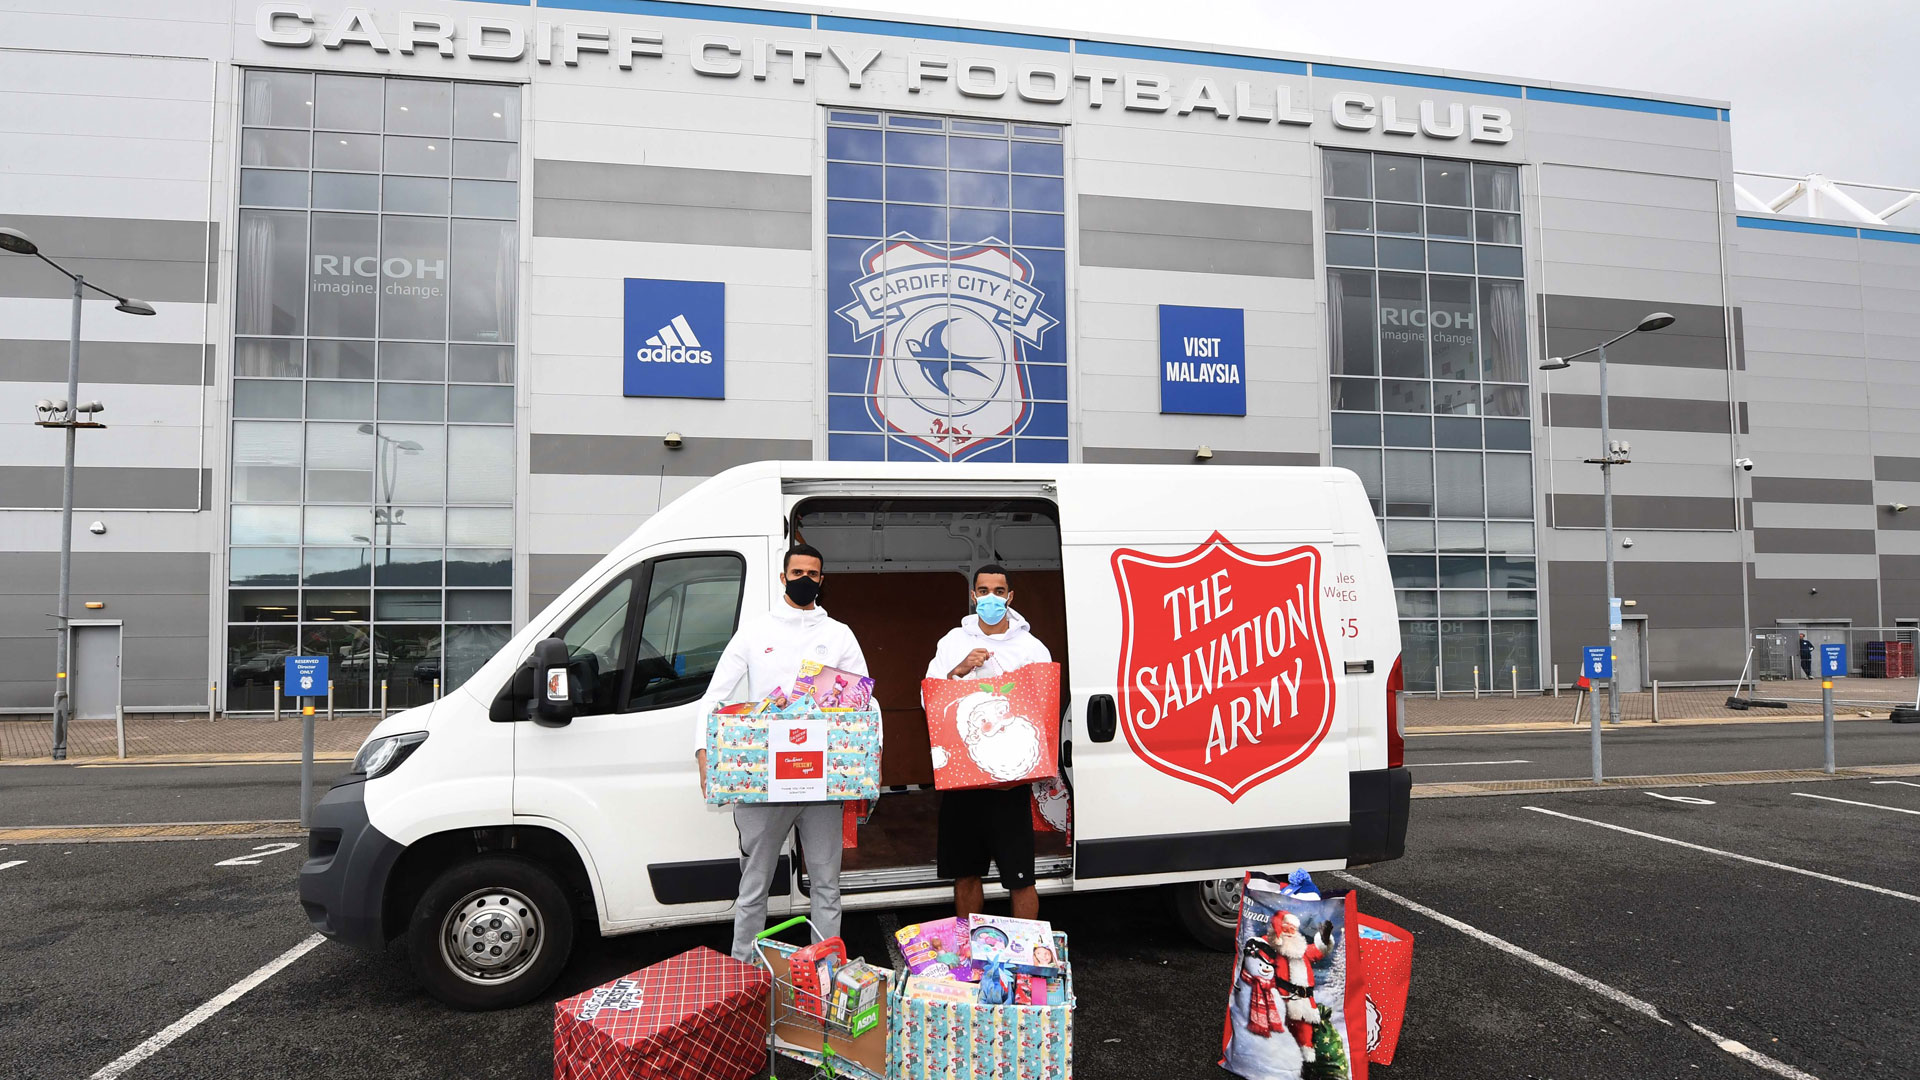 Cardiff City support The Salvation Army...